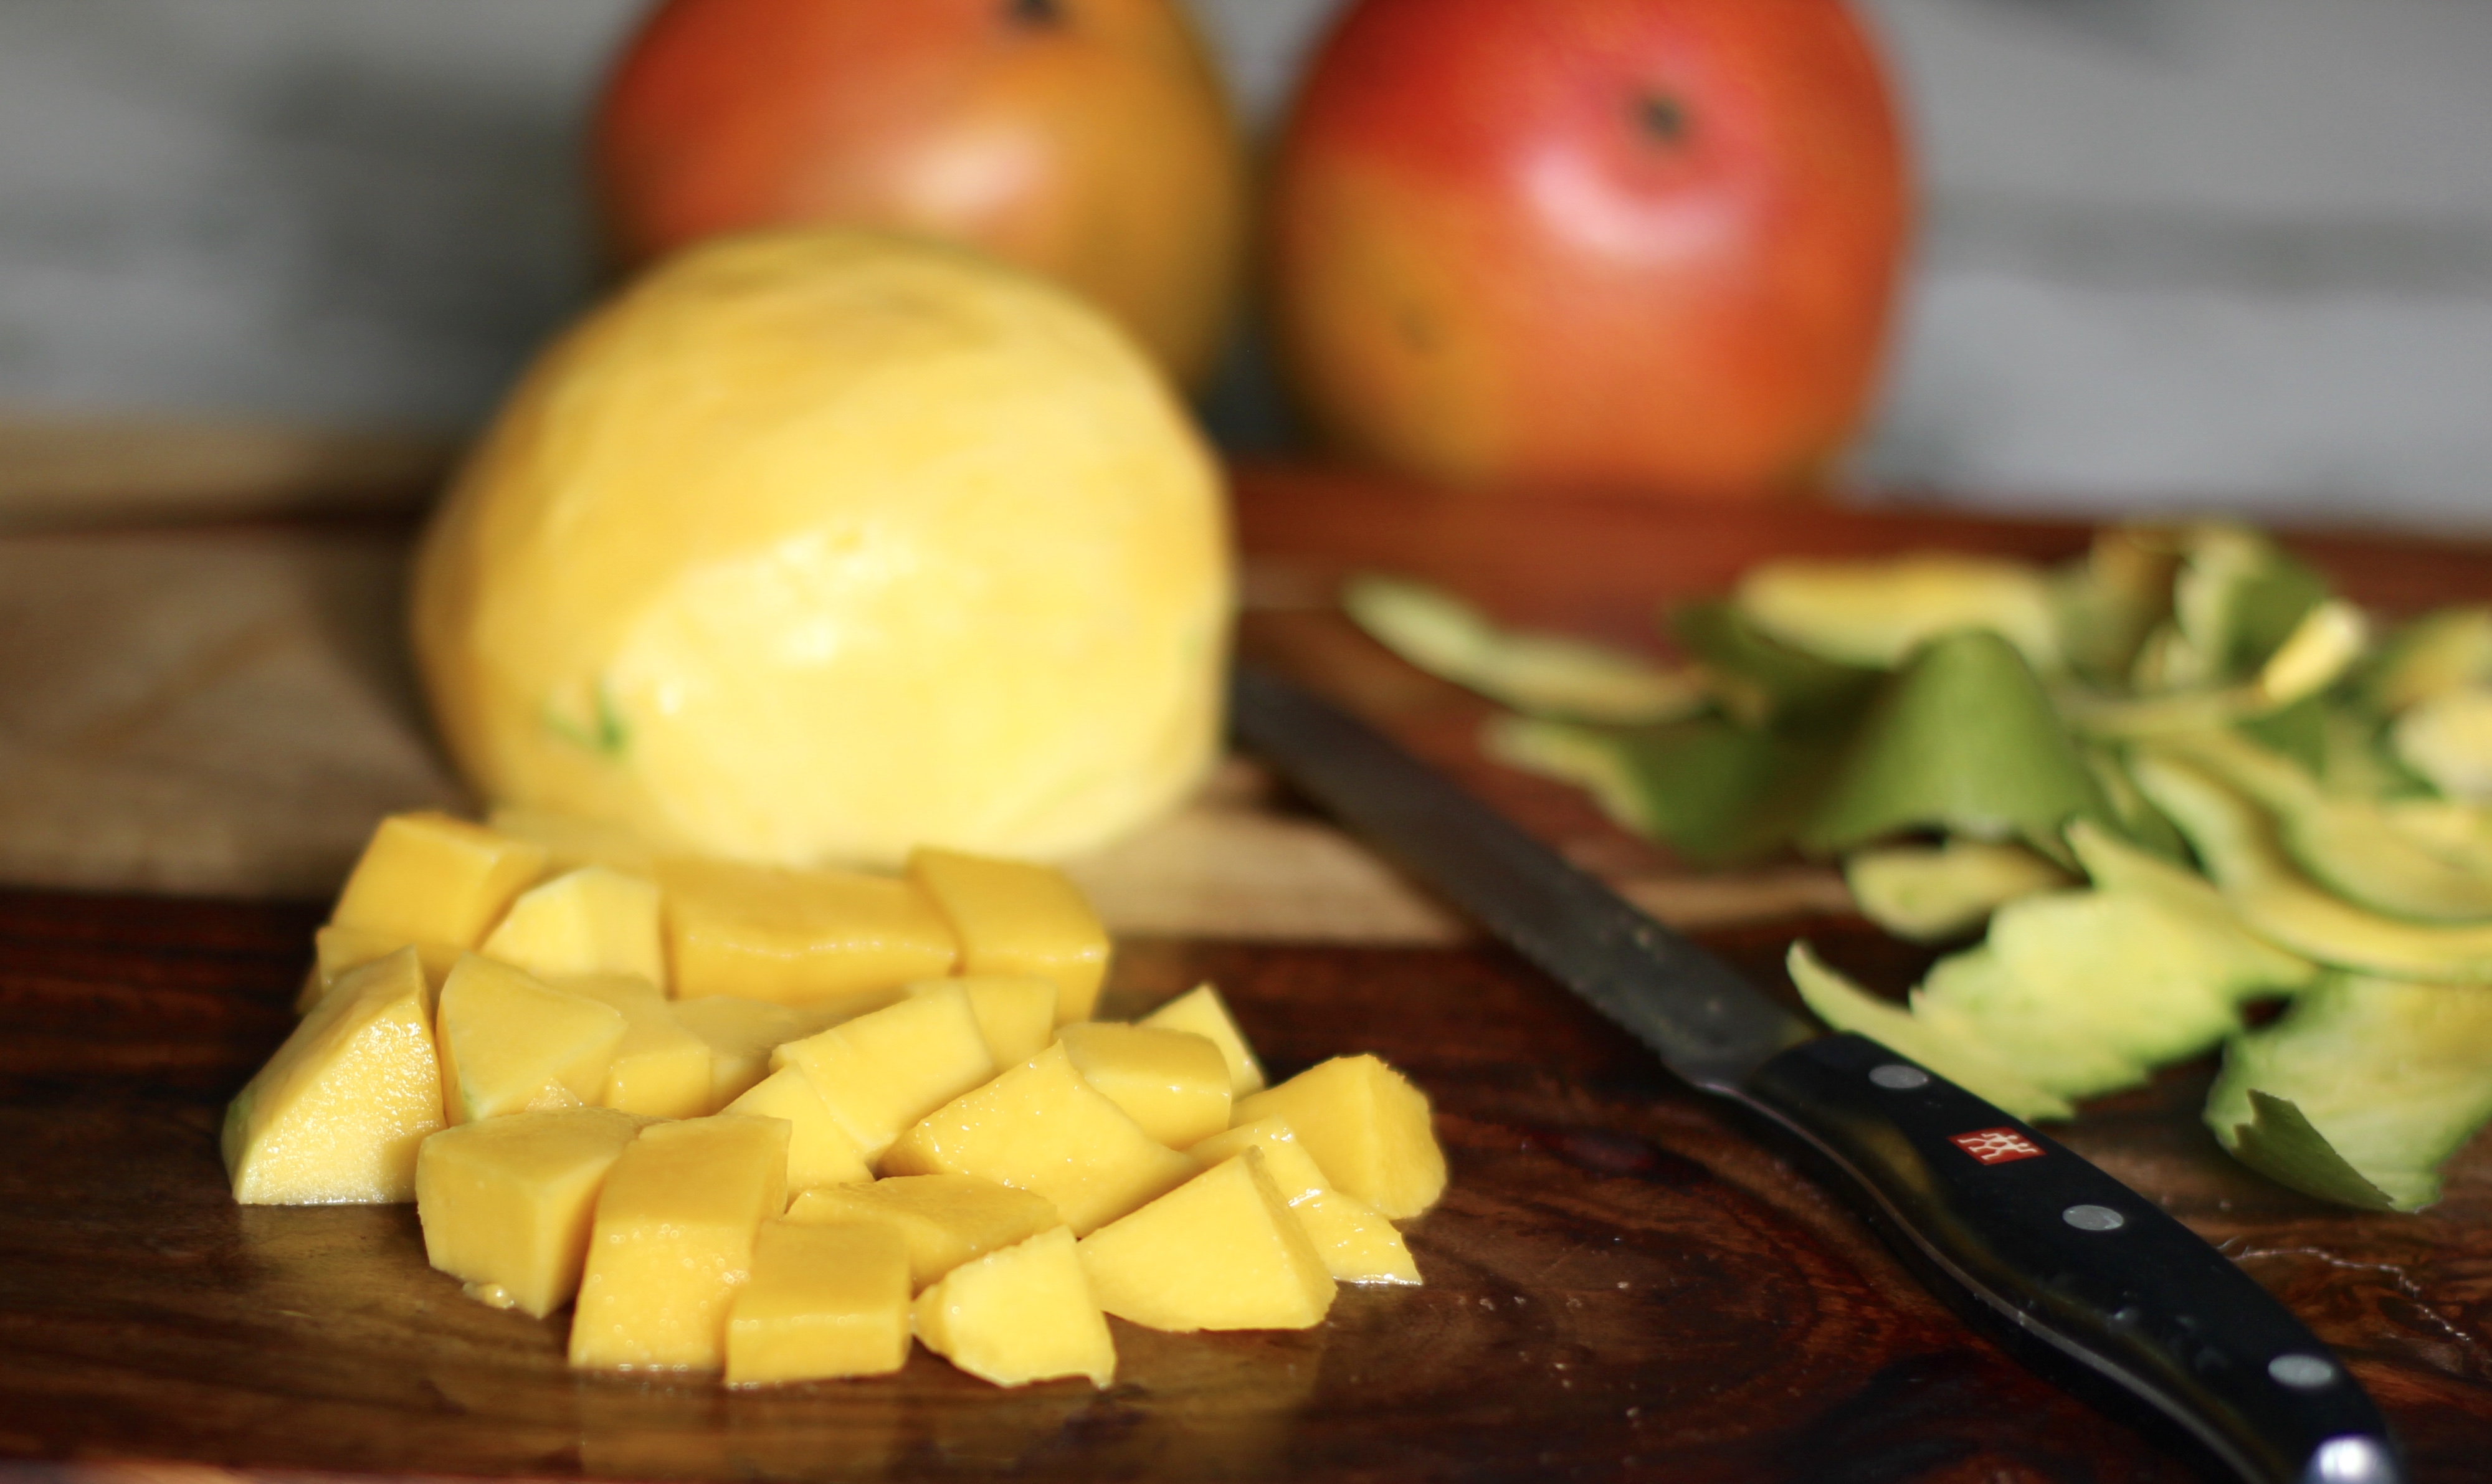 mango cut up on a wooden cutting board with knife